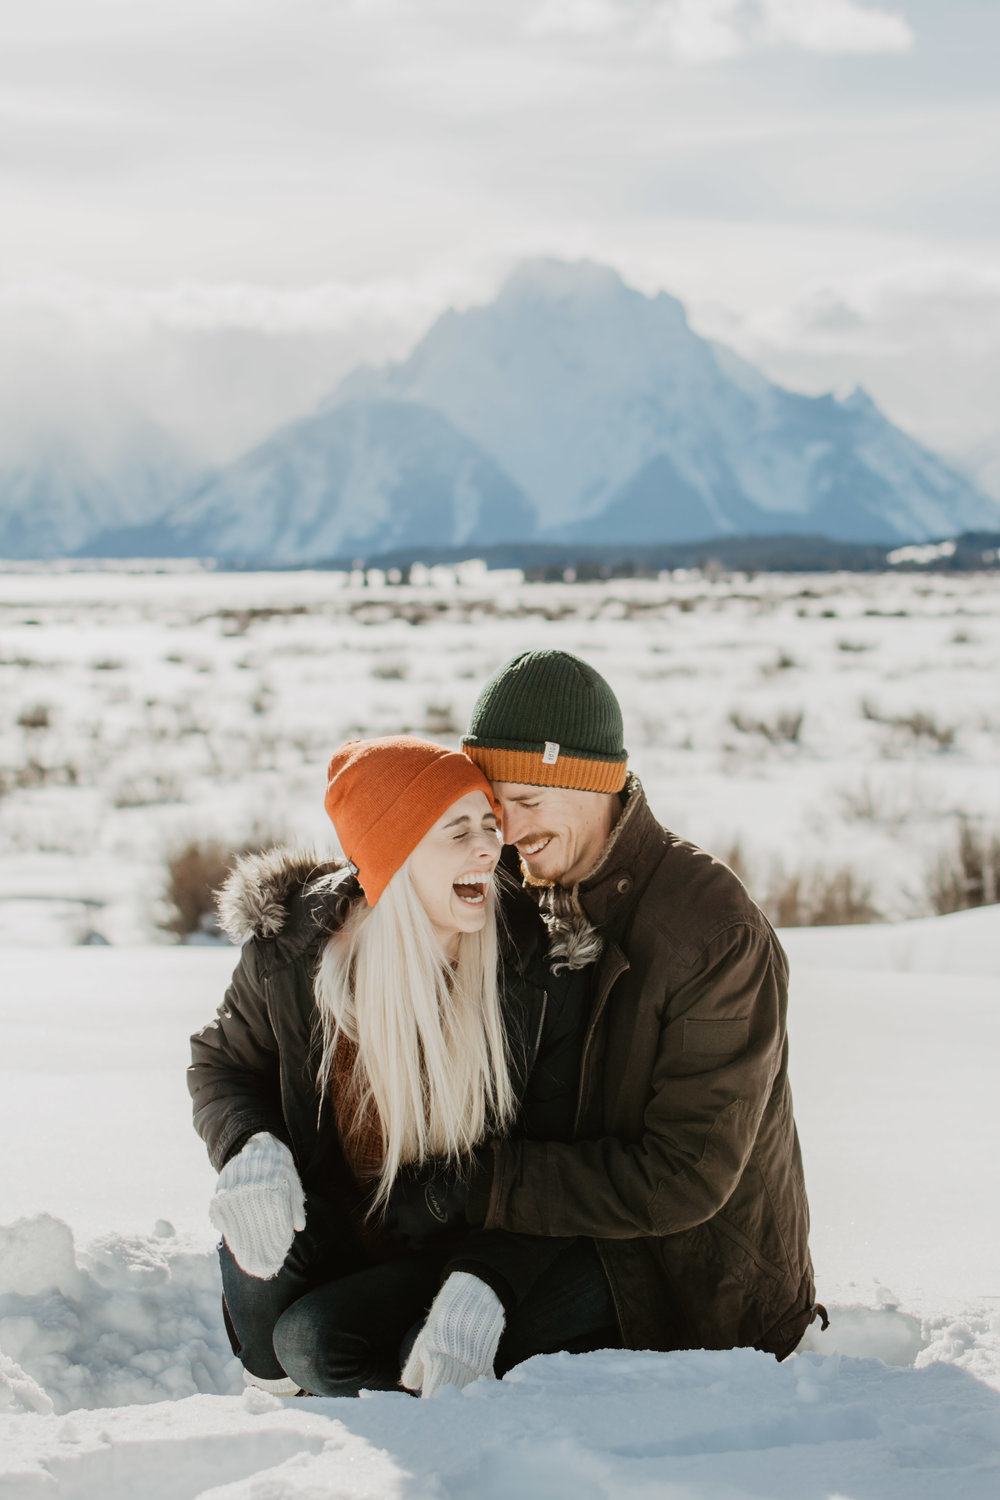 man and woman at their Grand Tetons winter engagement session laughing as they walk through the deep snow together | Jocilyn Bennett Photography | Winter Engagements | Snowy Engagements | Wyoming Engagement Photography | Utah Wedding Photographer | Winter Engagement Poses | What to Wear for Winter Engagements | Destination Wedding Photographer | Outfit ideas for Winter Engagements | Adventure Photographer | Wyoming Photographer | Winter Engagements in Jackson Hole | Jackson Hole Engagements | Wyoming Bride | Wyoming Wedding Photographer | Jackson Hole Wedding Photographer | 